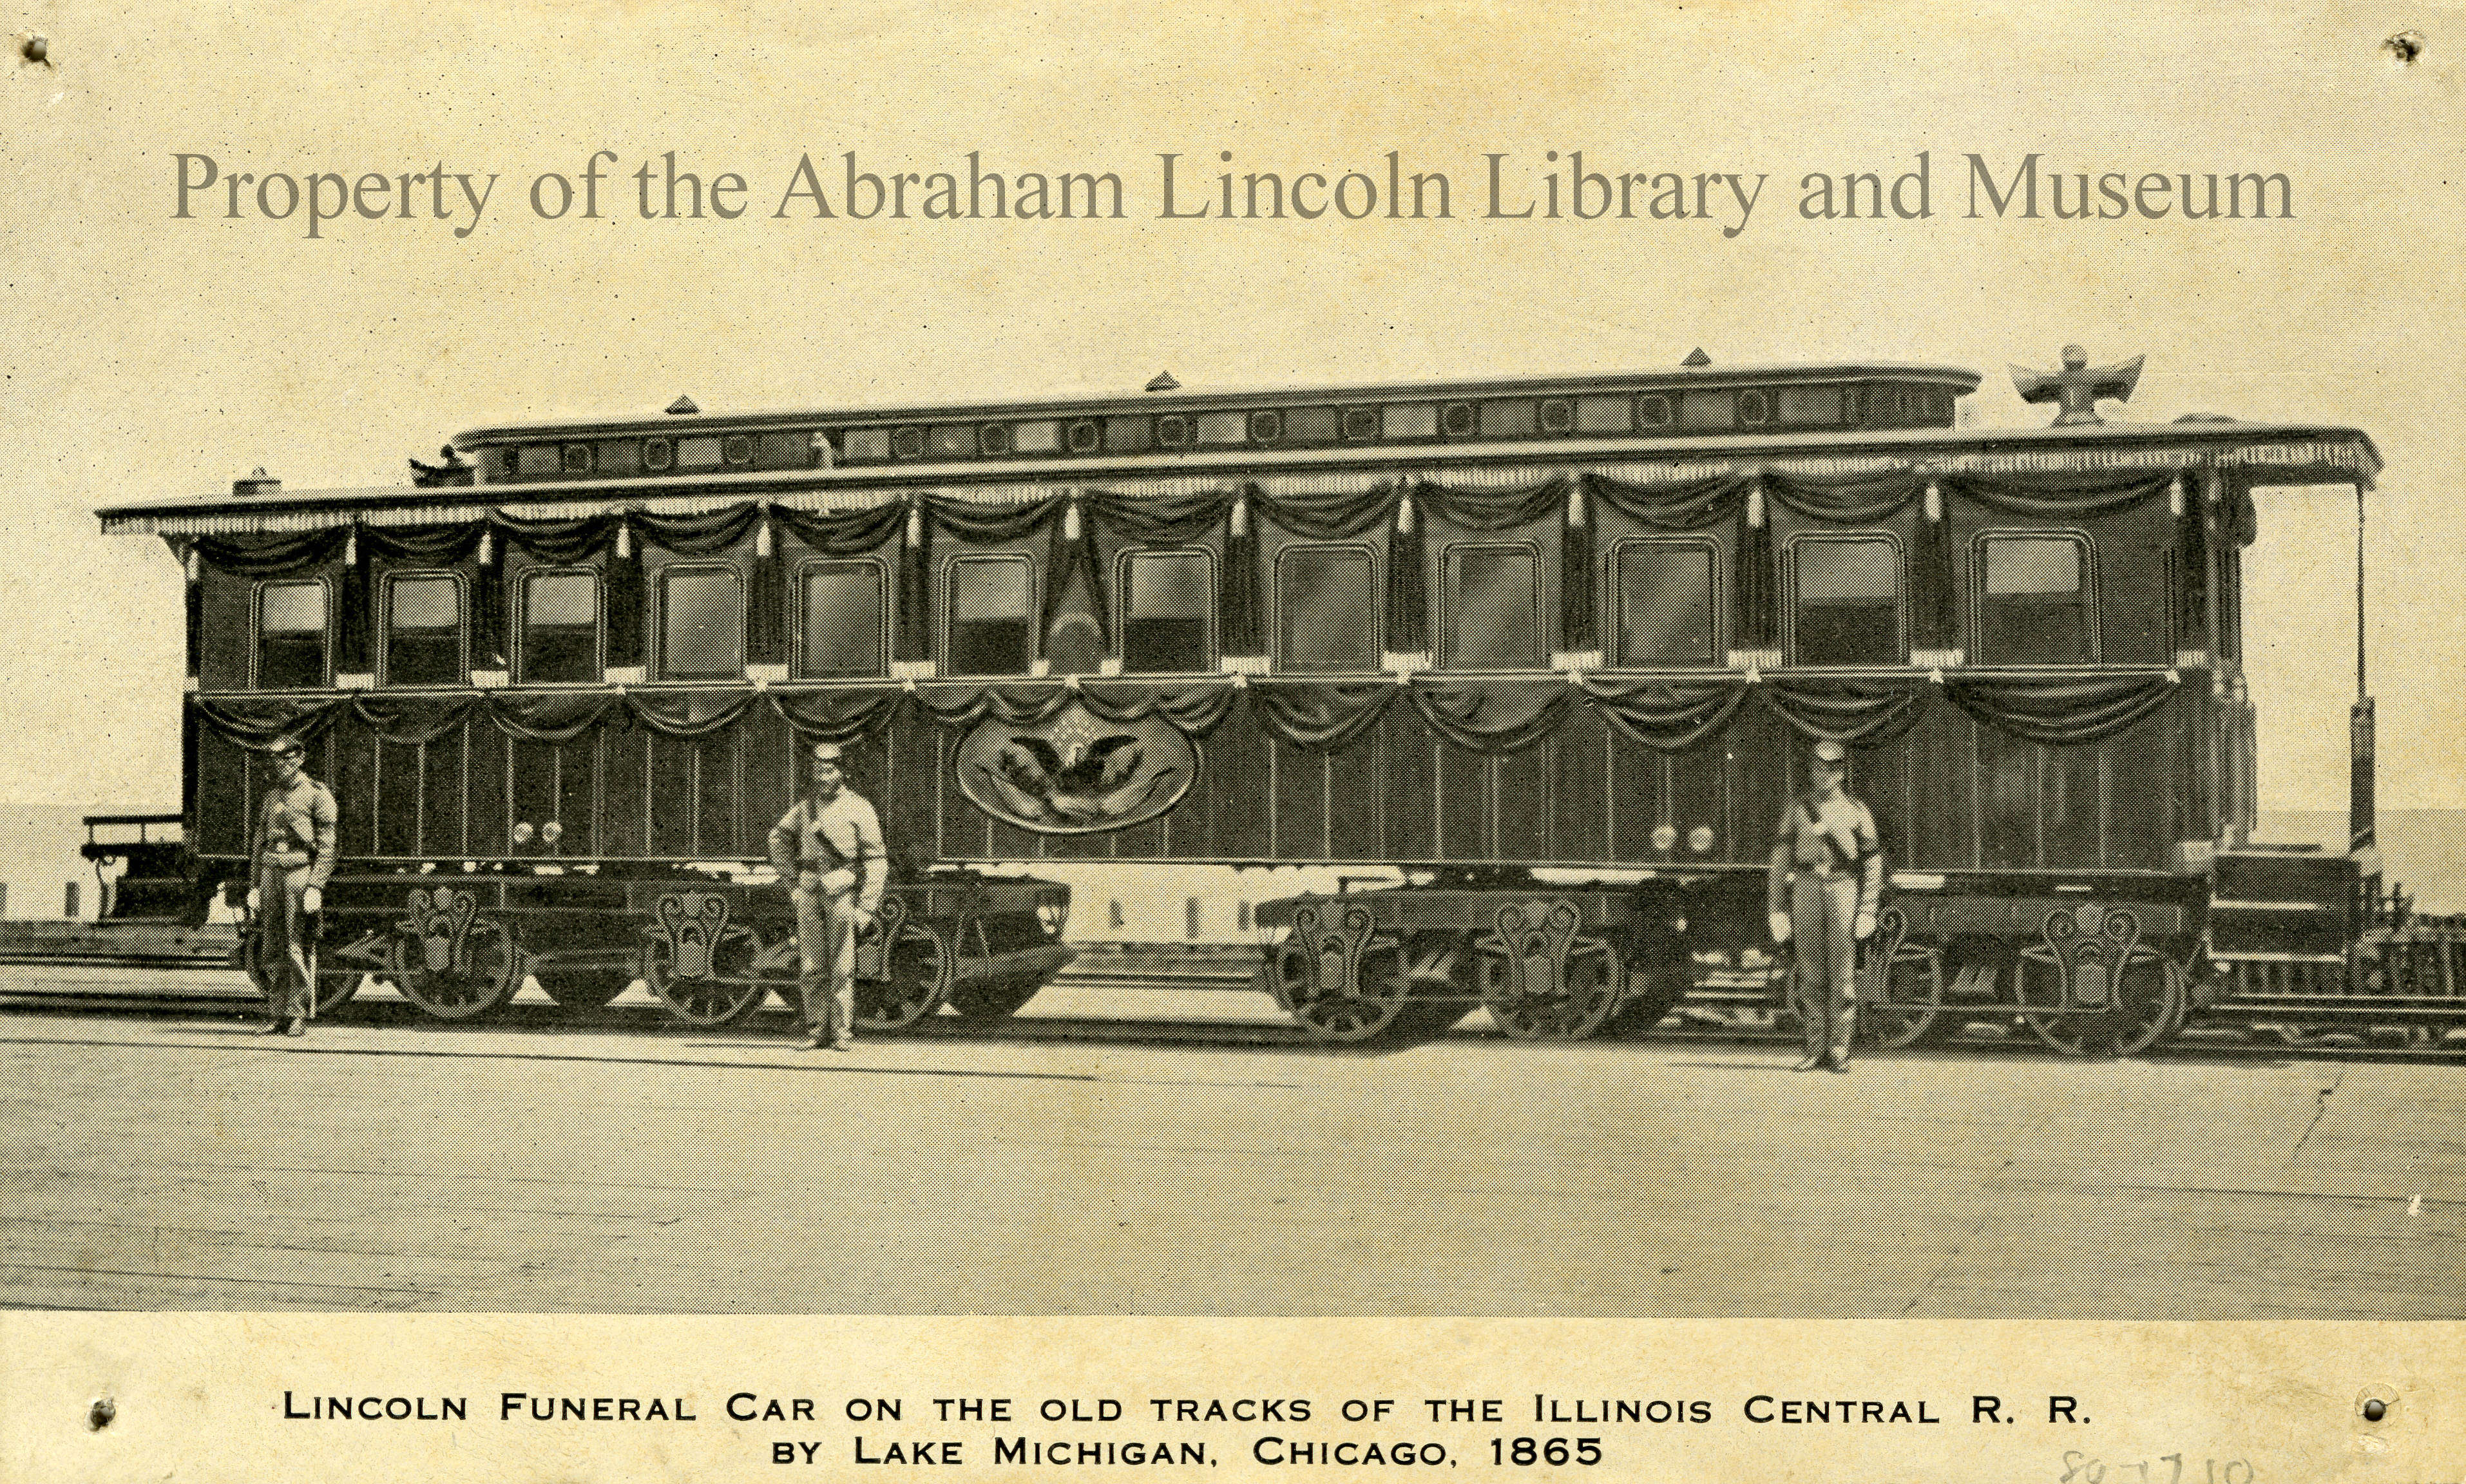 Lincoln Funeral Car on the Old Tracks of the Illinois Central R.R.